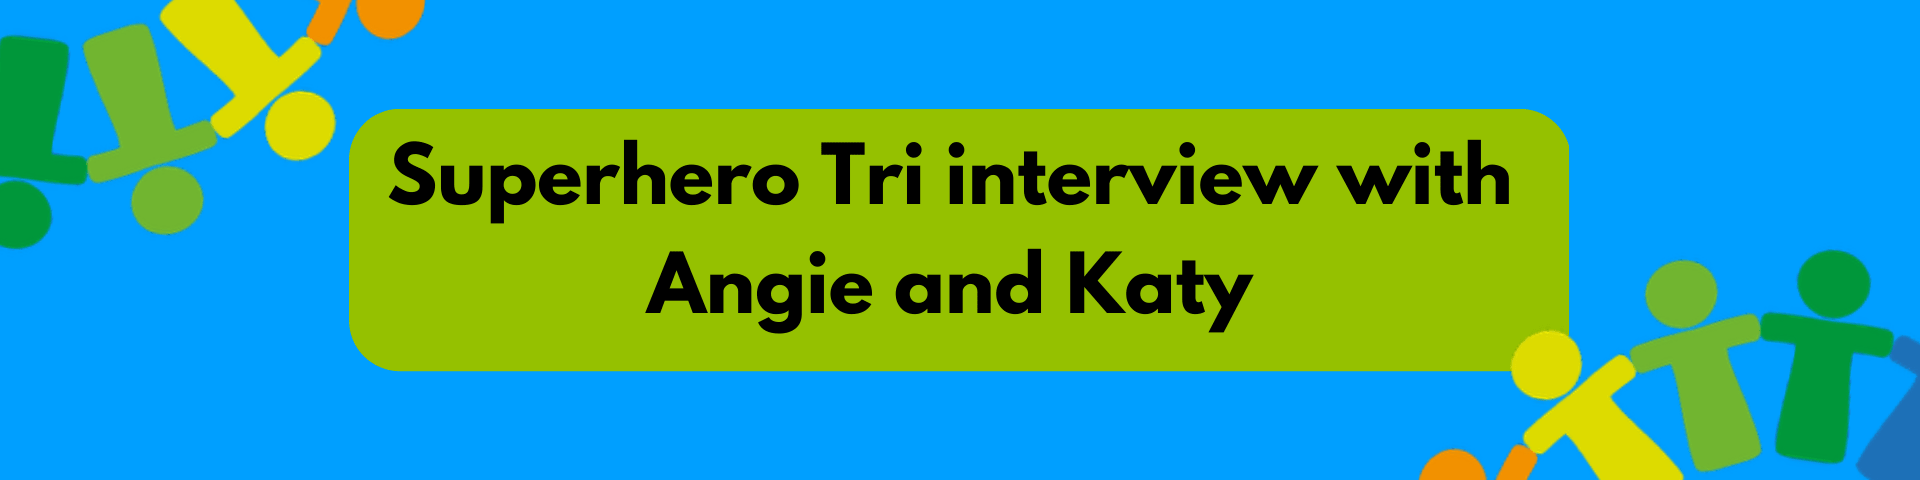 Bright blue background with a green box with the title: Superhero Tri interview with Angie and Katy